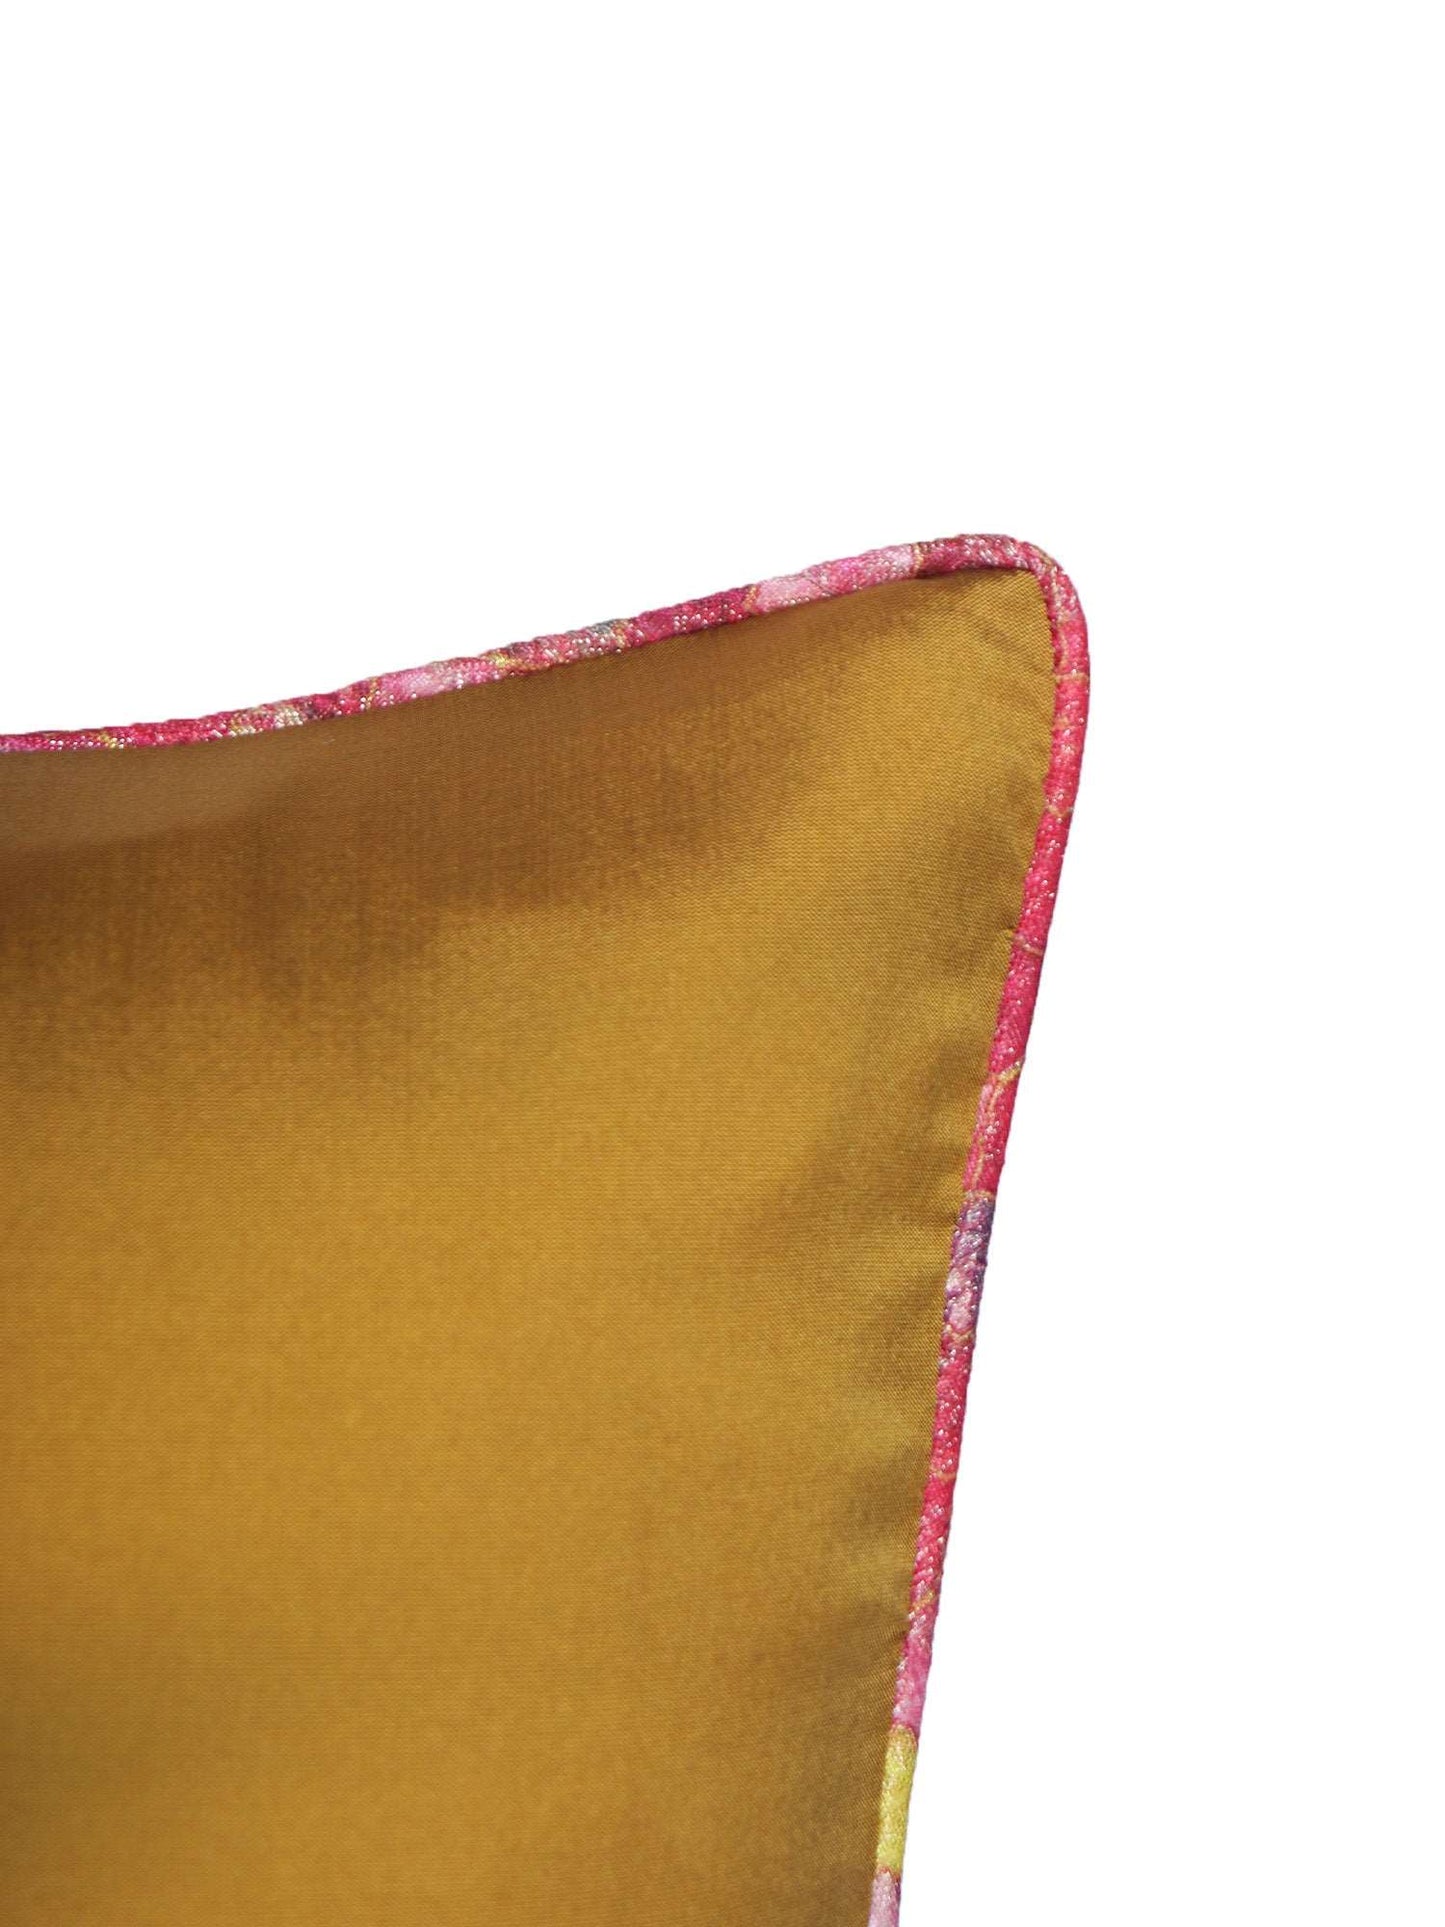 Cushion Cover for Sofa, Bed Varanasi Silk Motif with Cord Piping Pink Gold  - 16x16in(40x40cm) (Pack of 5)